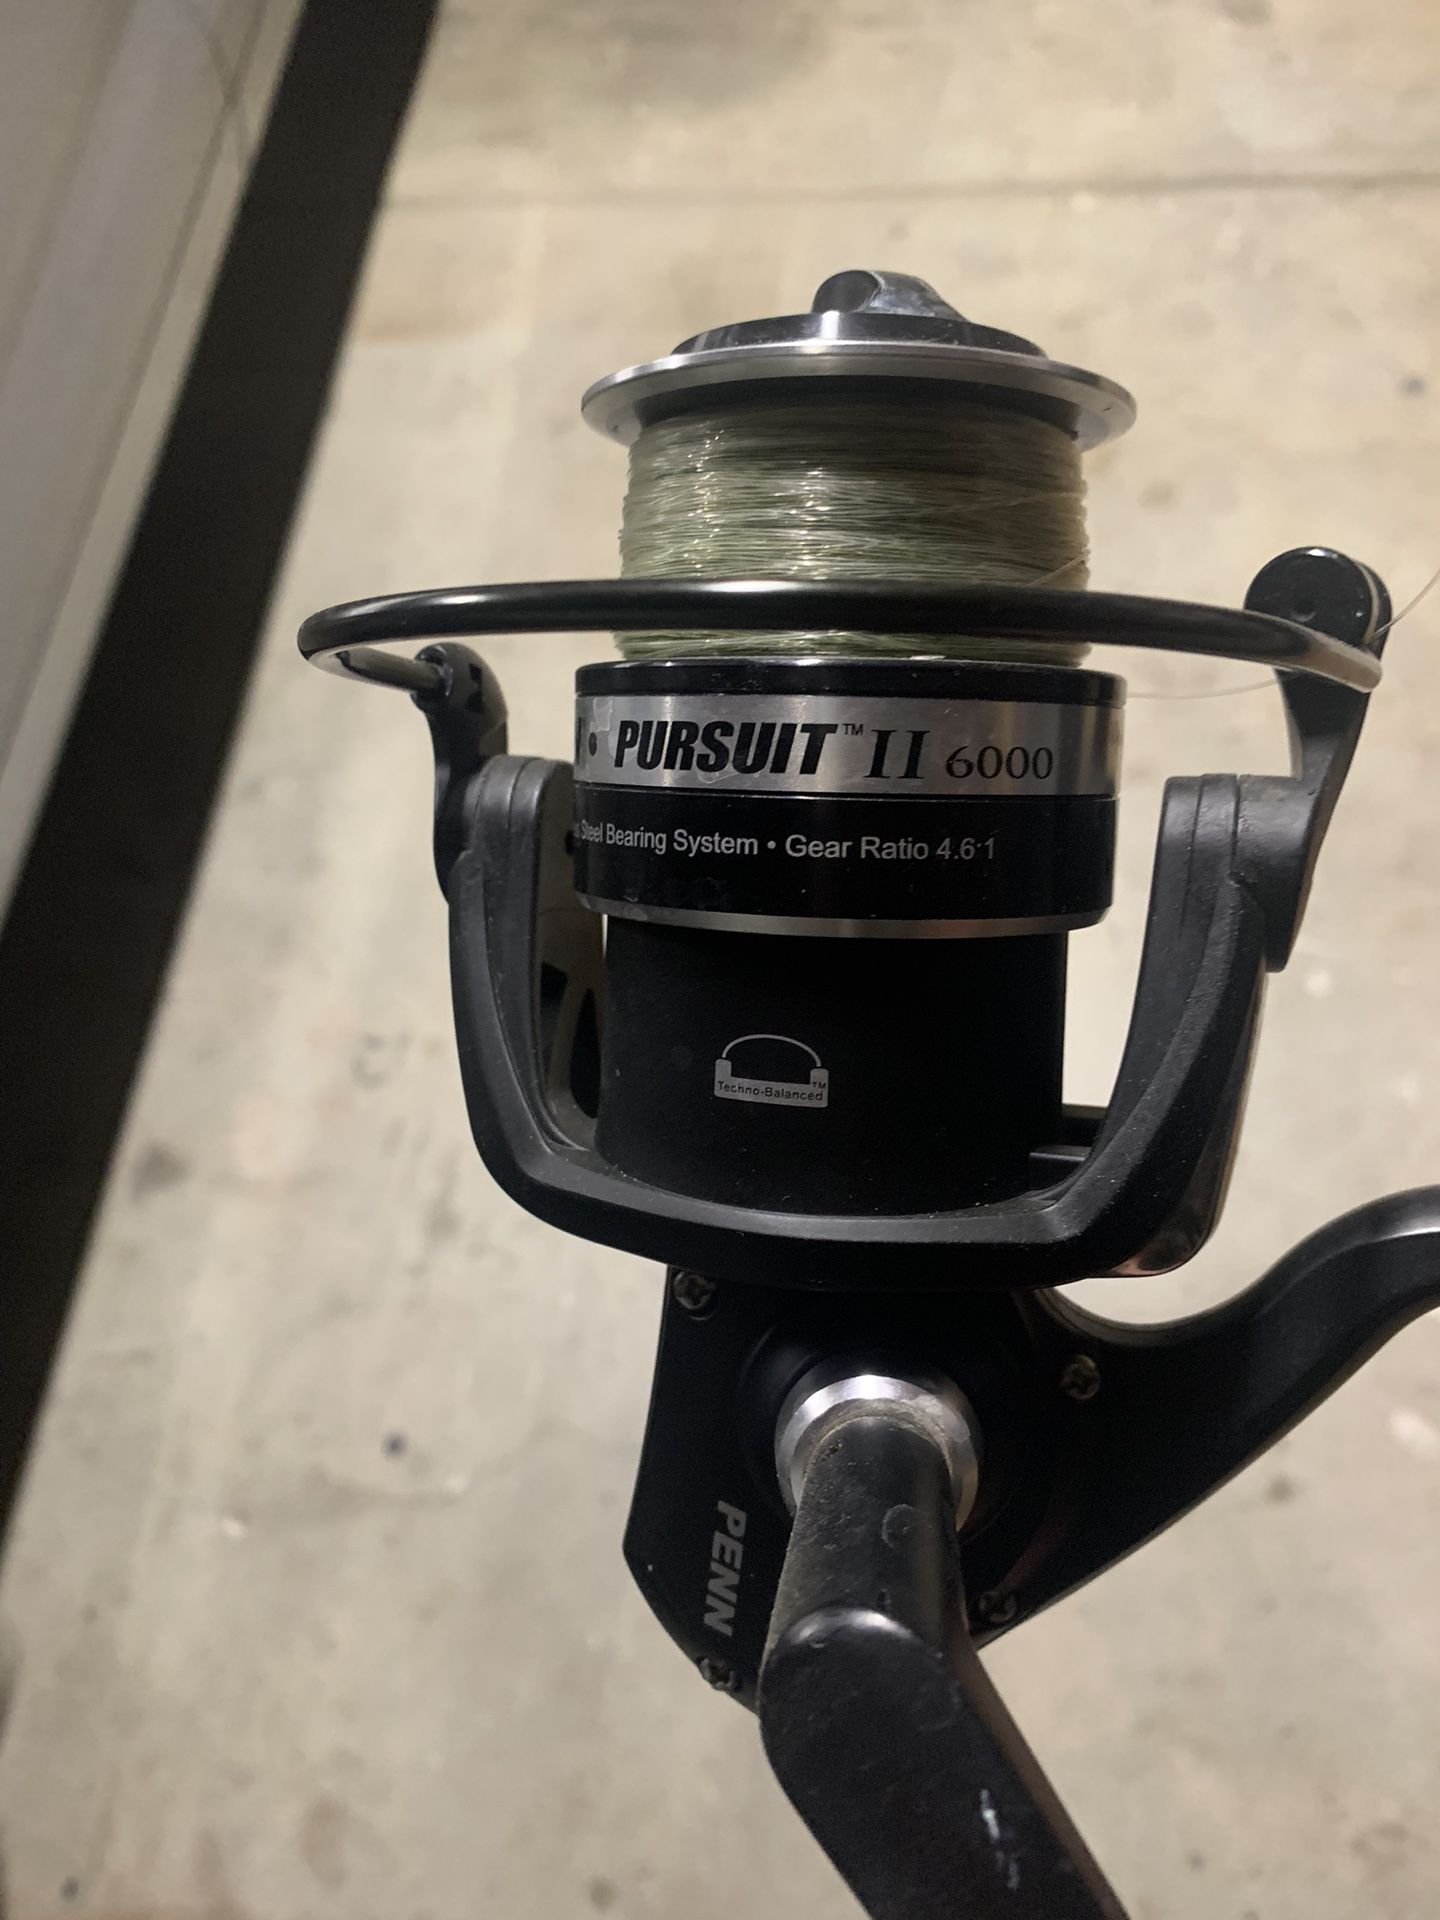 Penn Pursuit II 6000 Graphite Combo for Sale in Salinas, CA - OfferUp